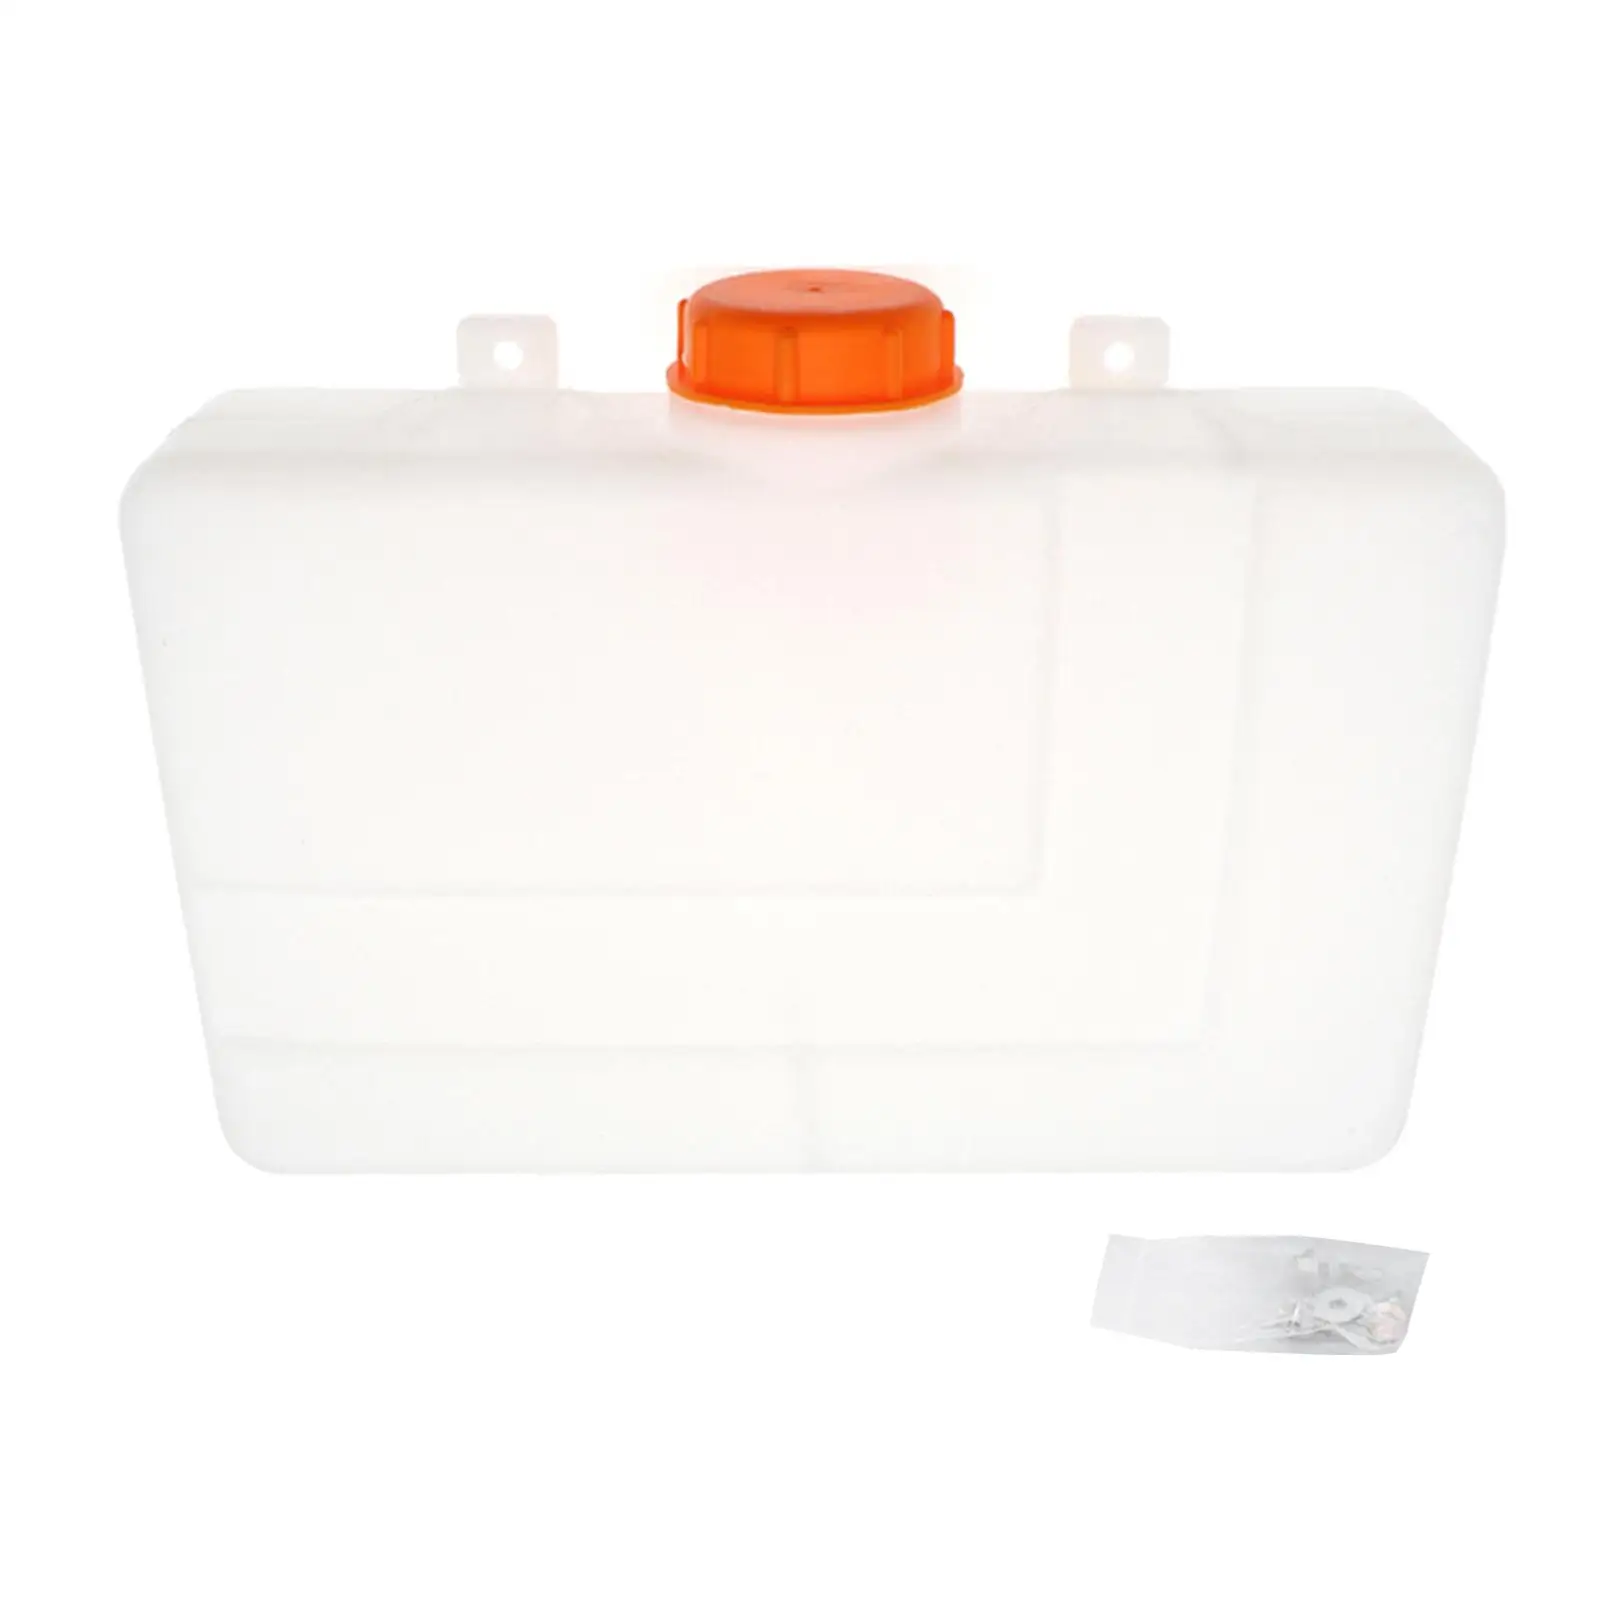 Gasoline Fuel Oil Tank Plastic 7L Gas Can for Motorcycle Carry Other Liquids